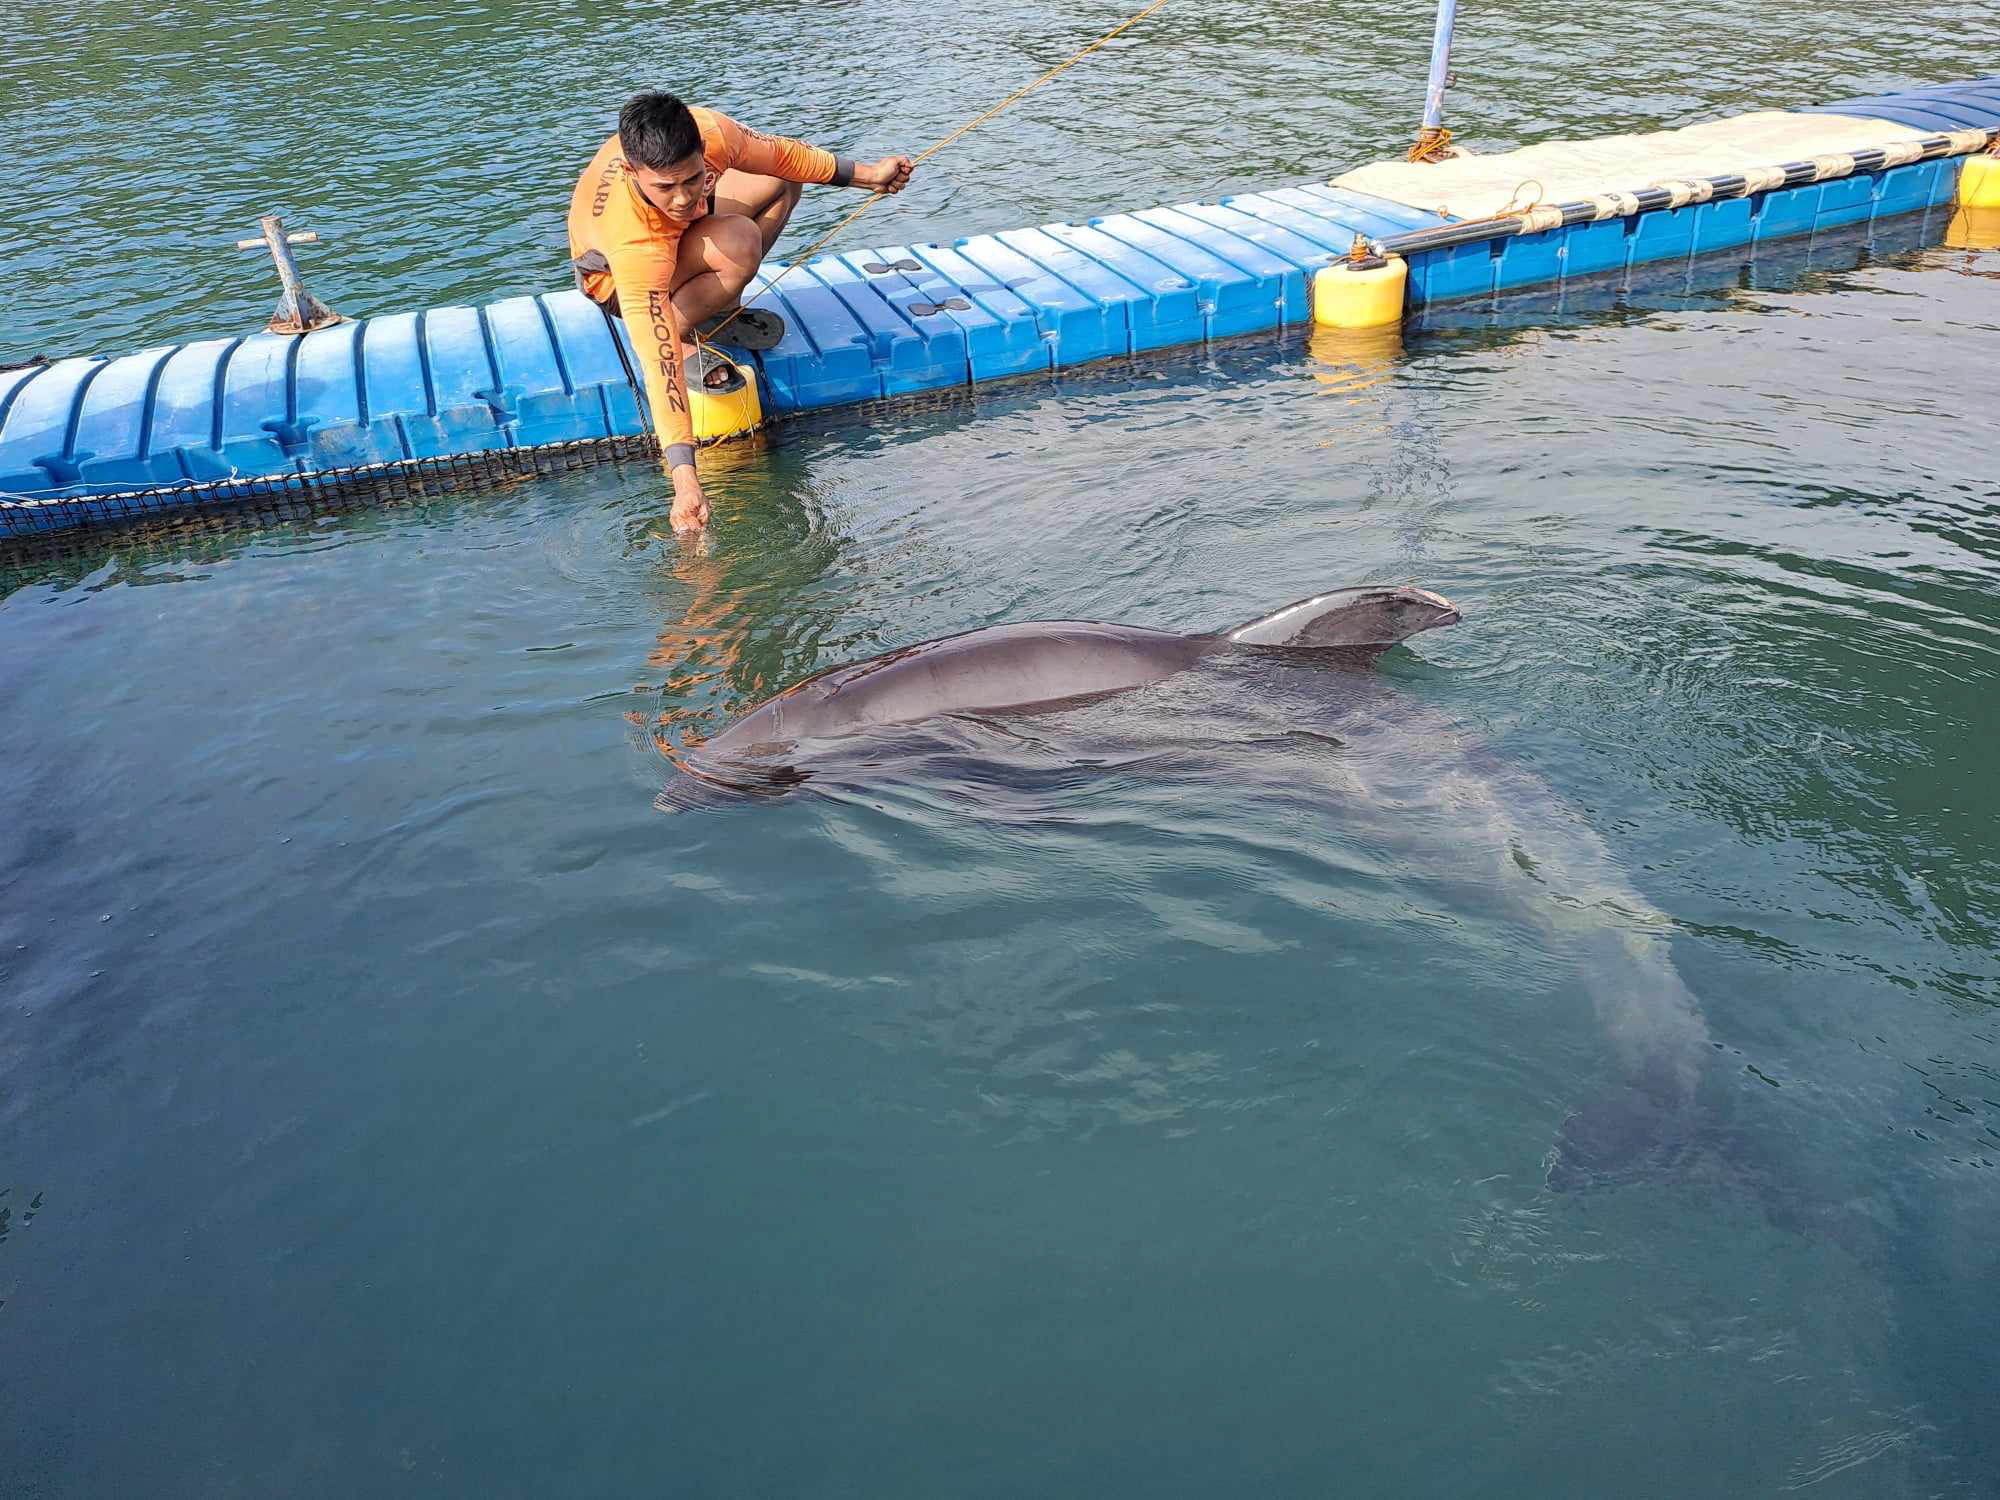 In a span of just five days, 14 dolphins were spotted along the coastline of the Ilocos region, many of them getting stranded in the shallow waters, officials of the Bureau of Fisheries and Aquatic Resources (BFAR) said on Wednesday.